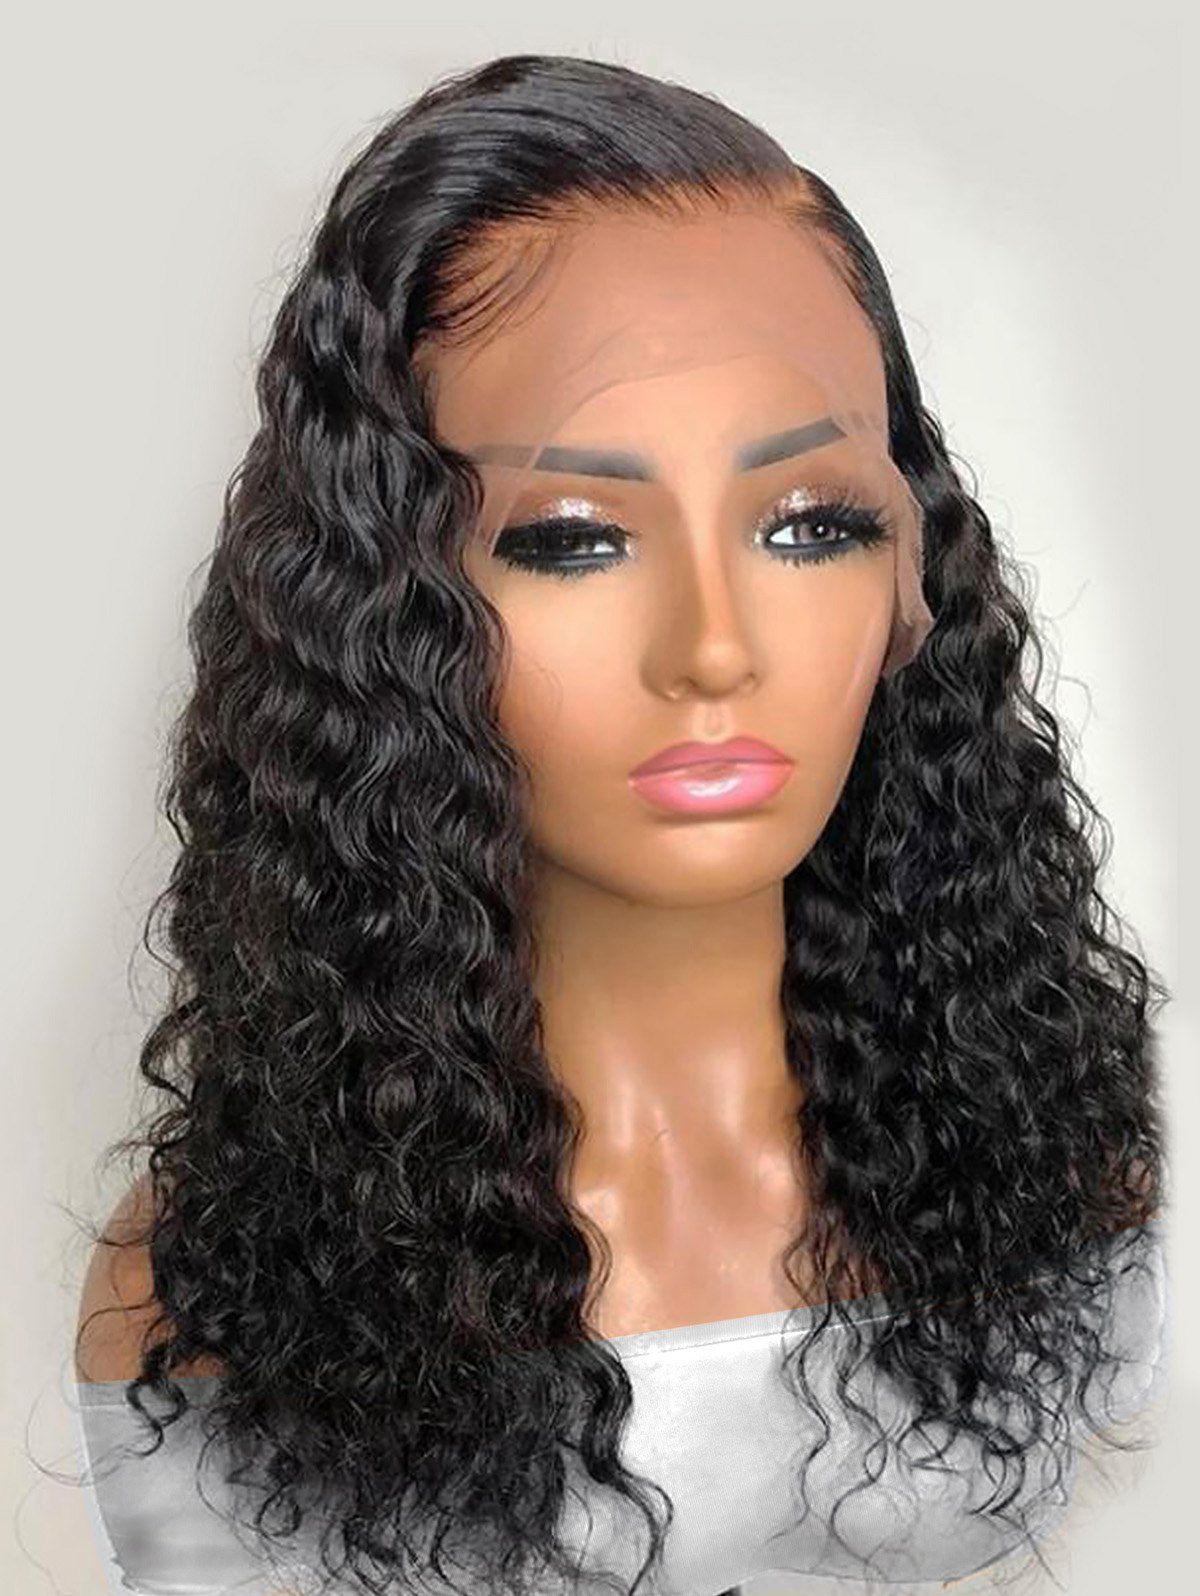 150% Human Hair Wig 13*4 Lace Front Curly Bob Wig - BLACK 12INCH